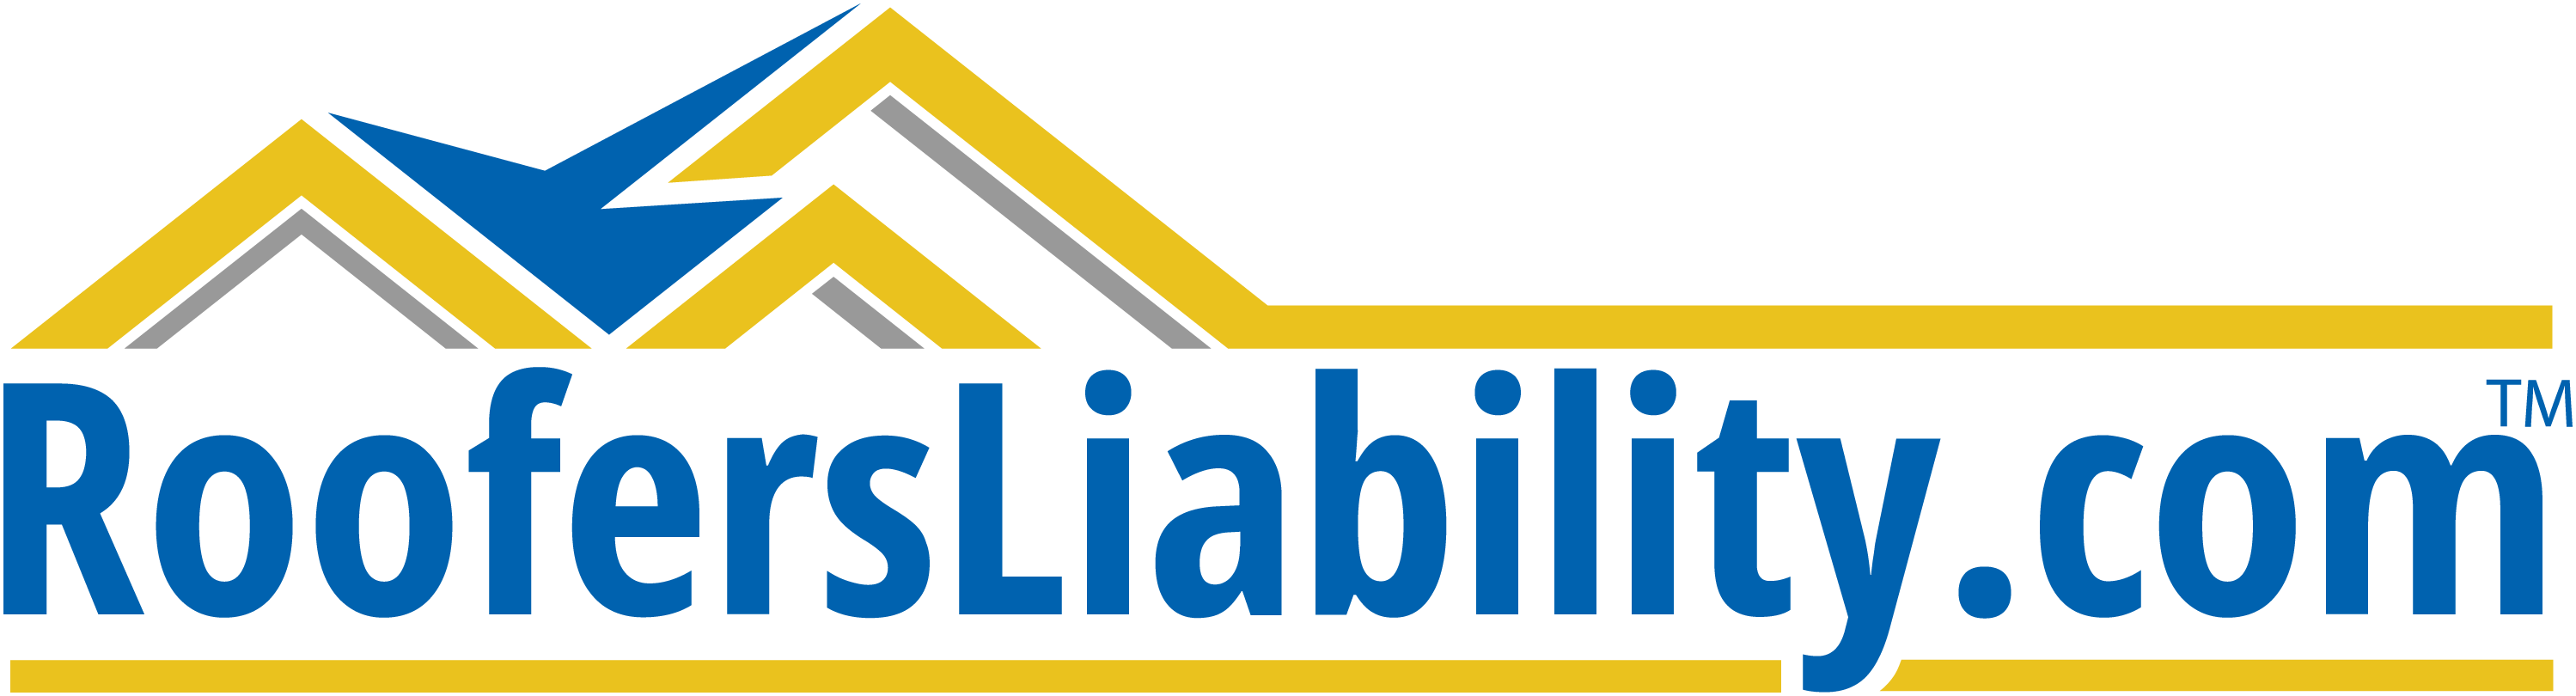 Roofers Liability